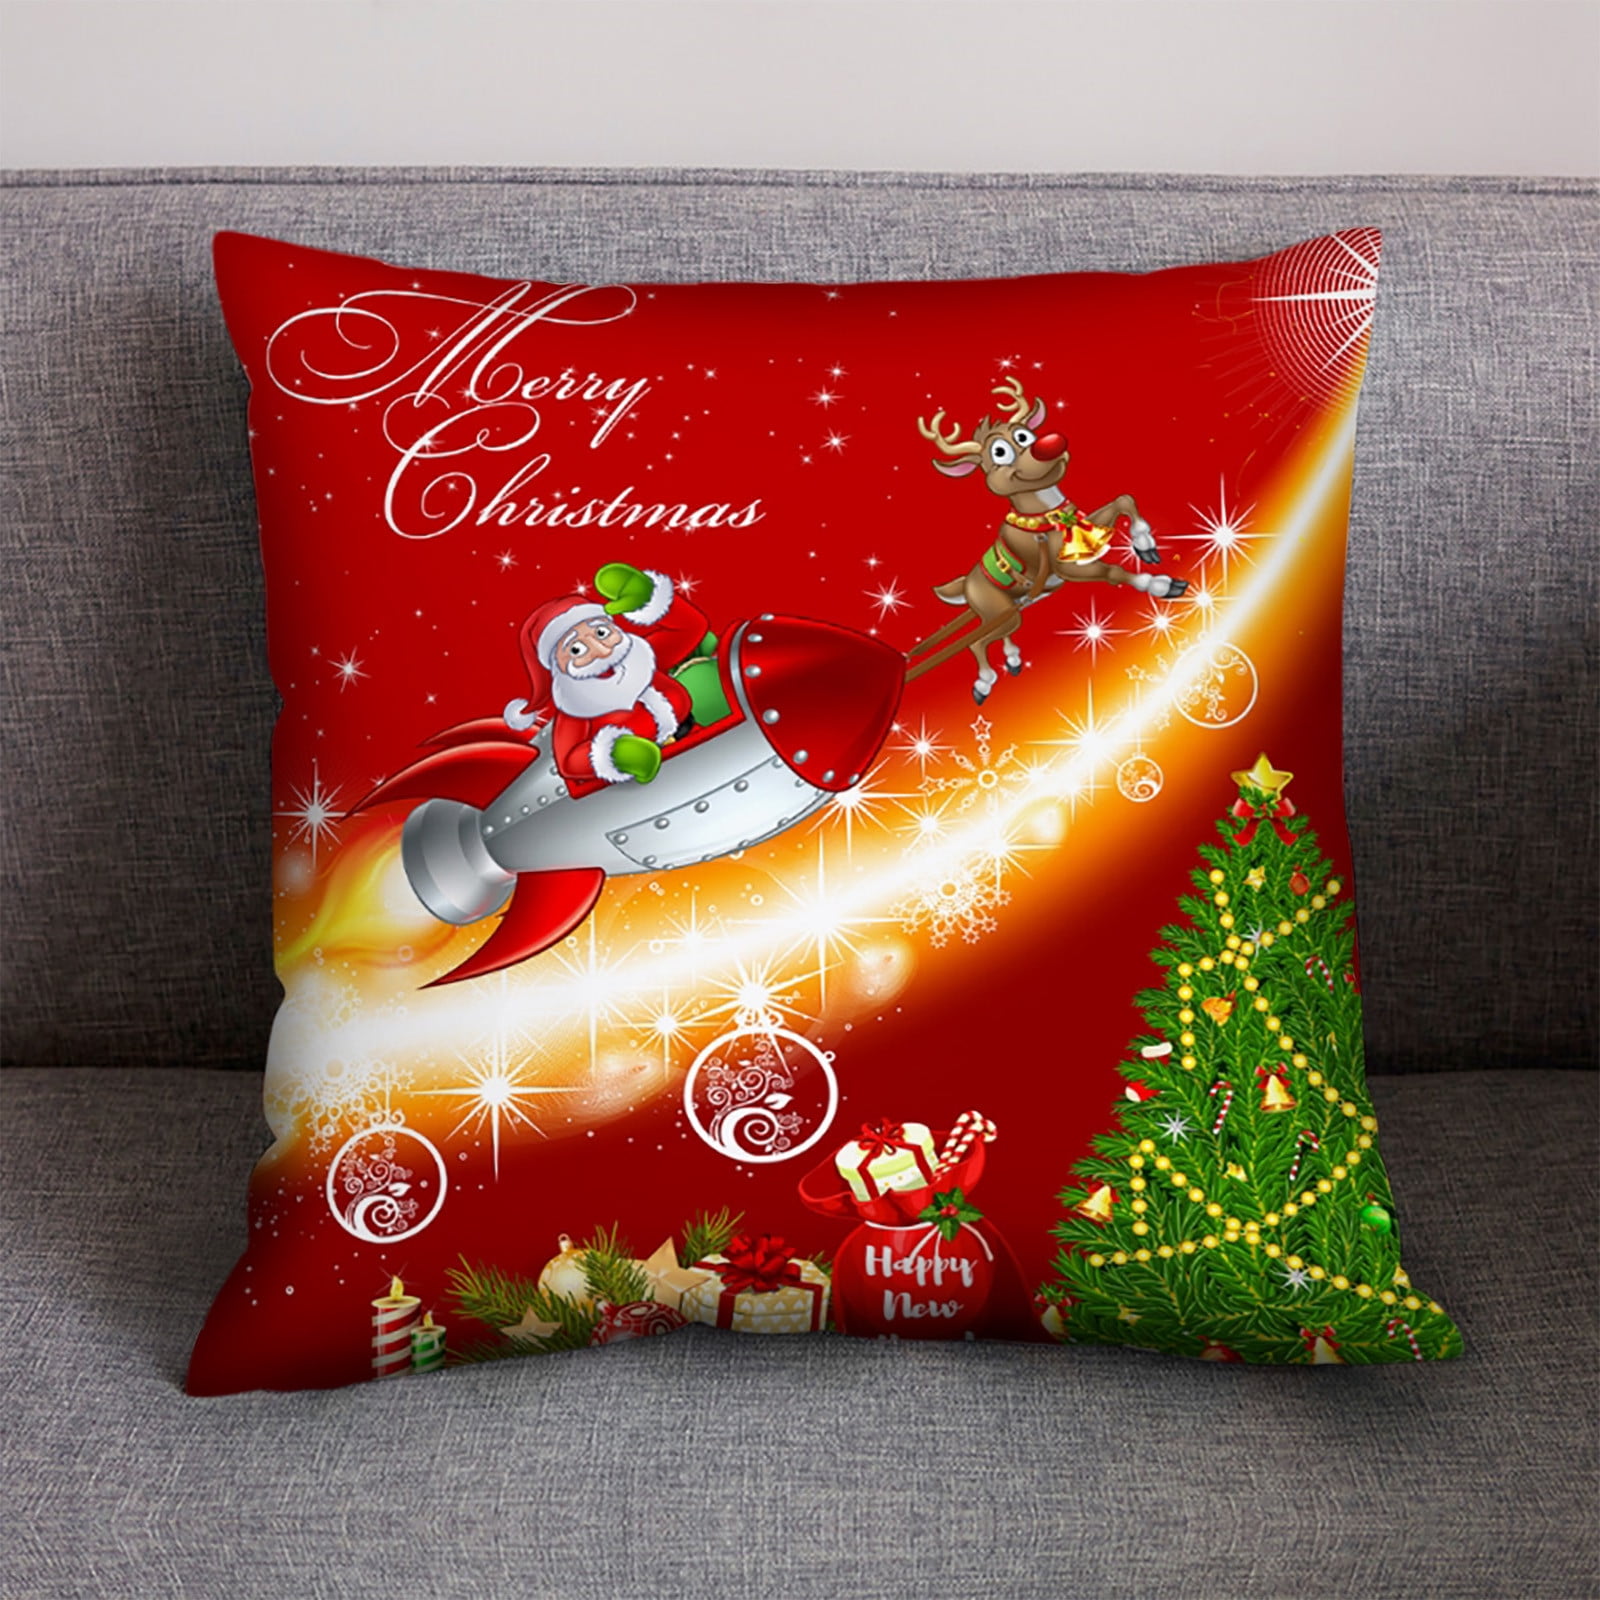 Topfinel Red and Gold Christmas Pillows Decorative Throw Pillow Covers  18x18 Set of 2, Xmas Tree Grinch Decorations Soft Velvet Couch Pillow  Covers